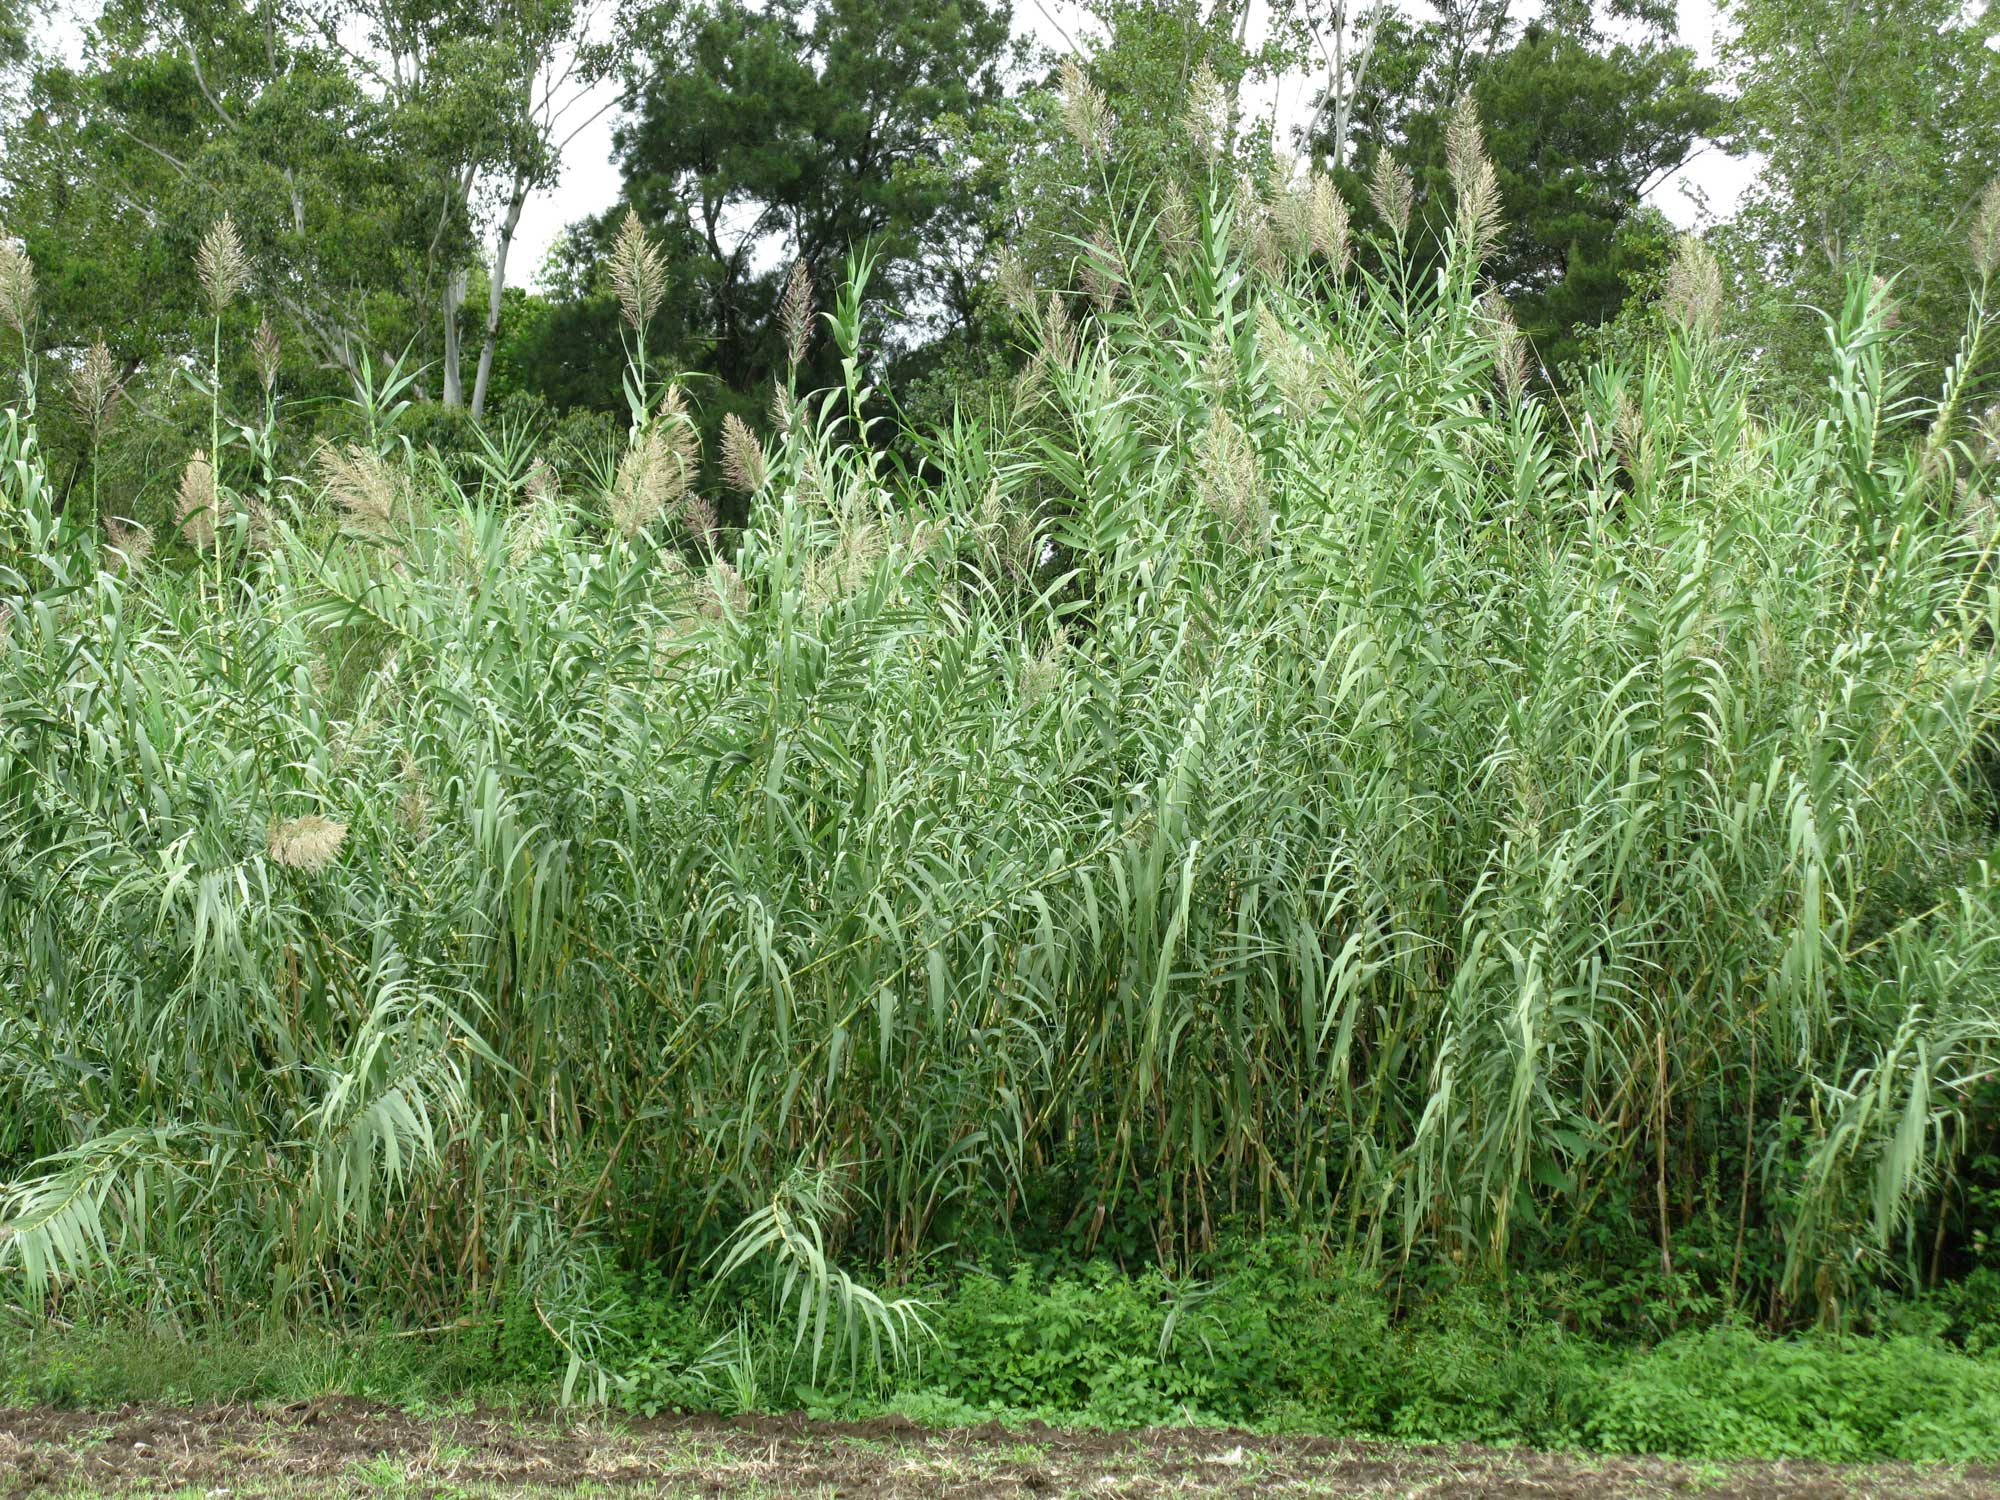 Photograph of a clump of giant reed plants growing in Australia. The photo shows a tight group of plants. The reeds have tall stems with thin-pointed leaves. The stems end in inflorescences.